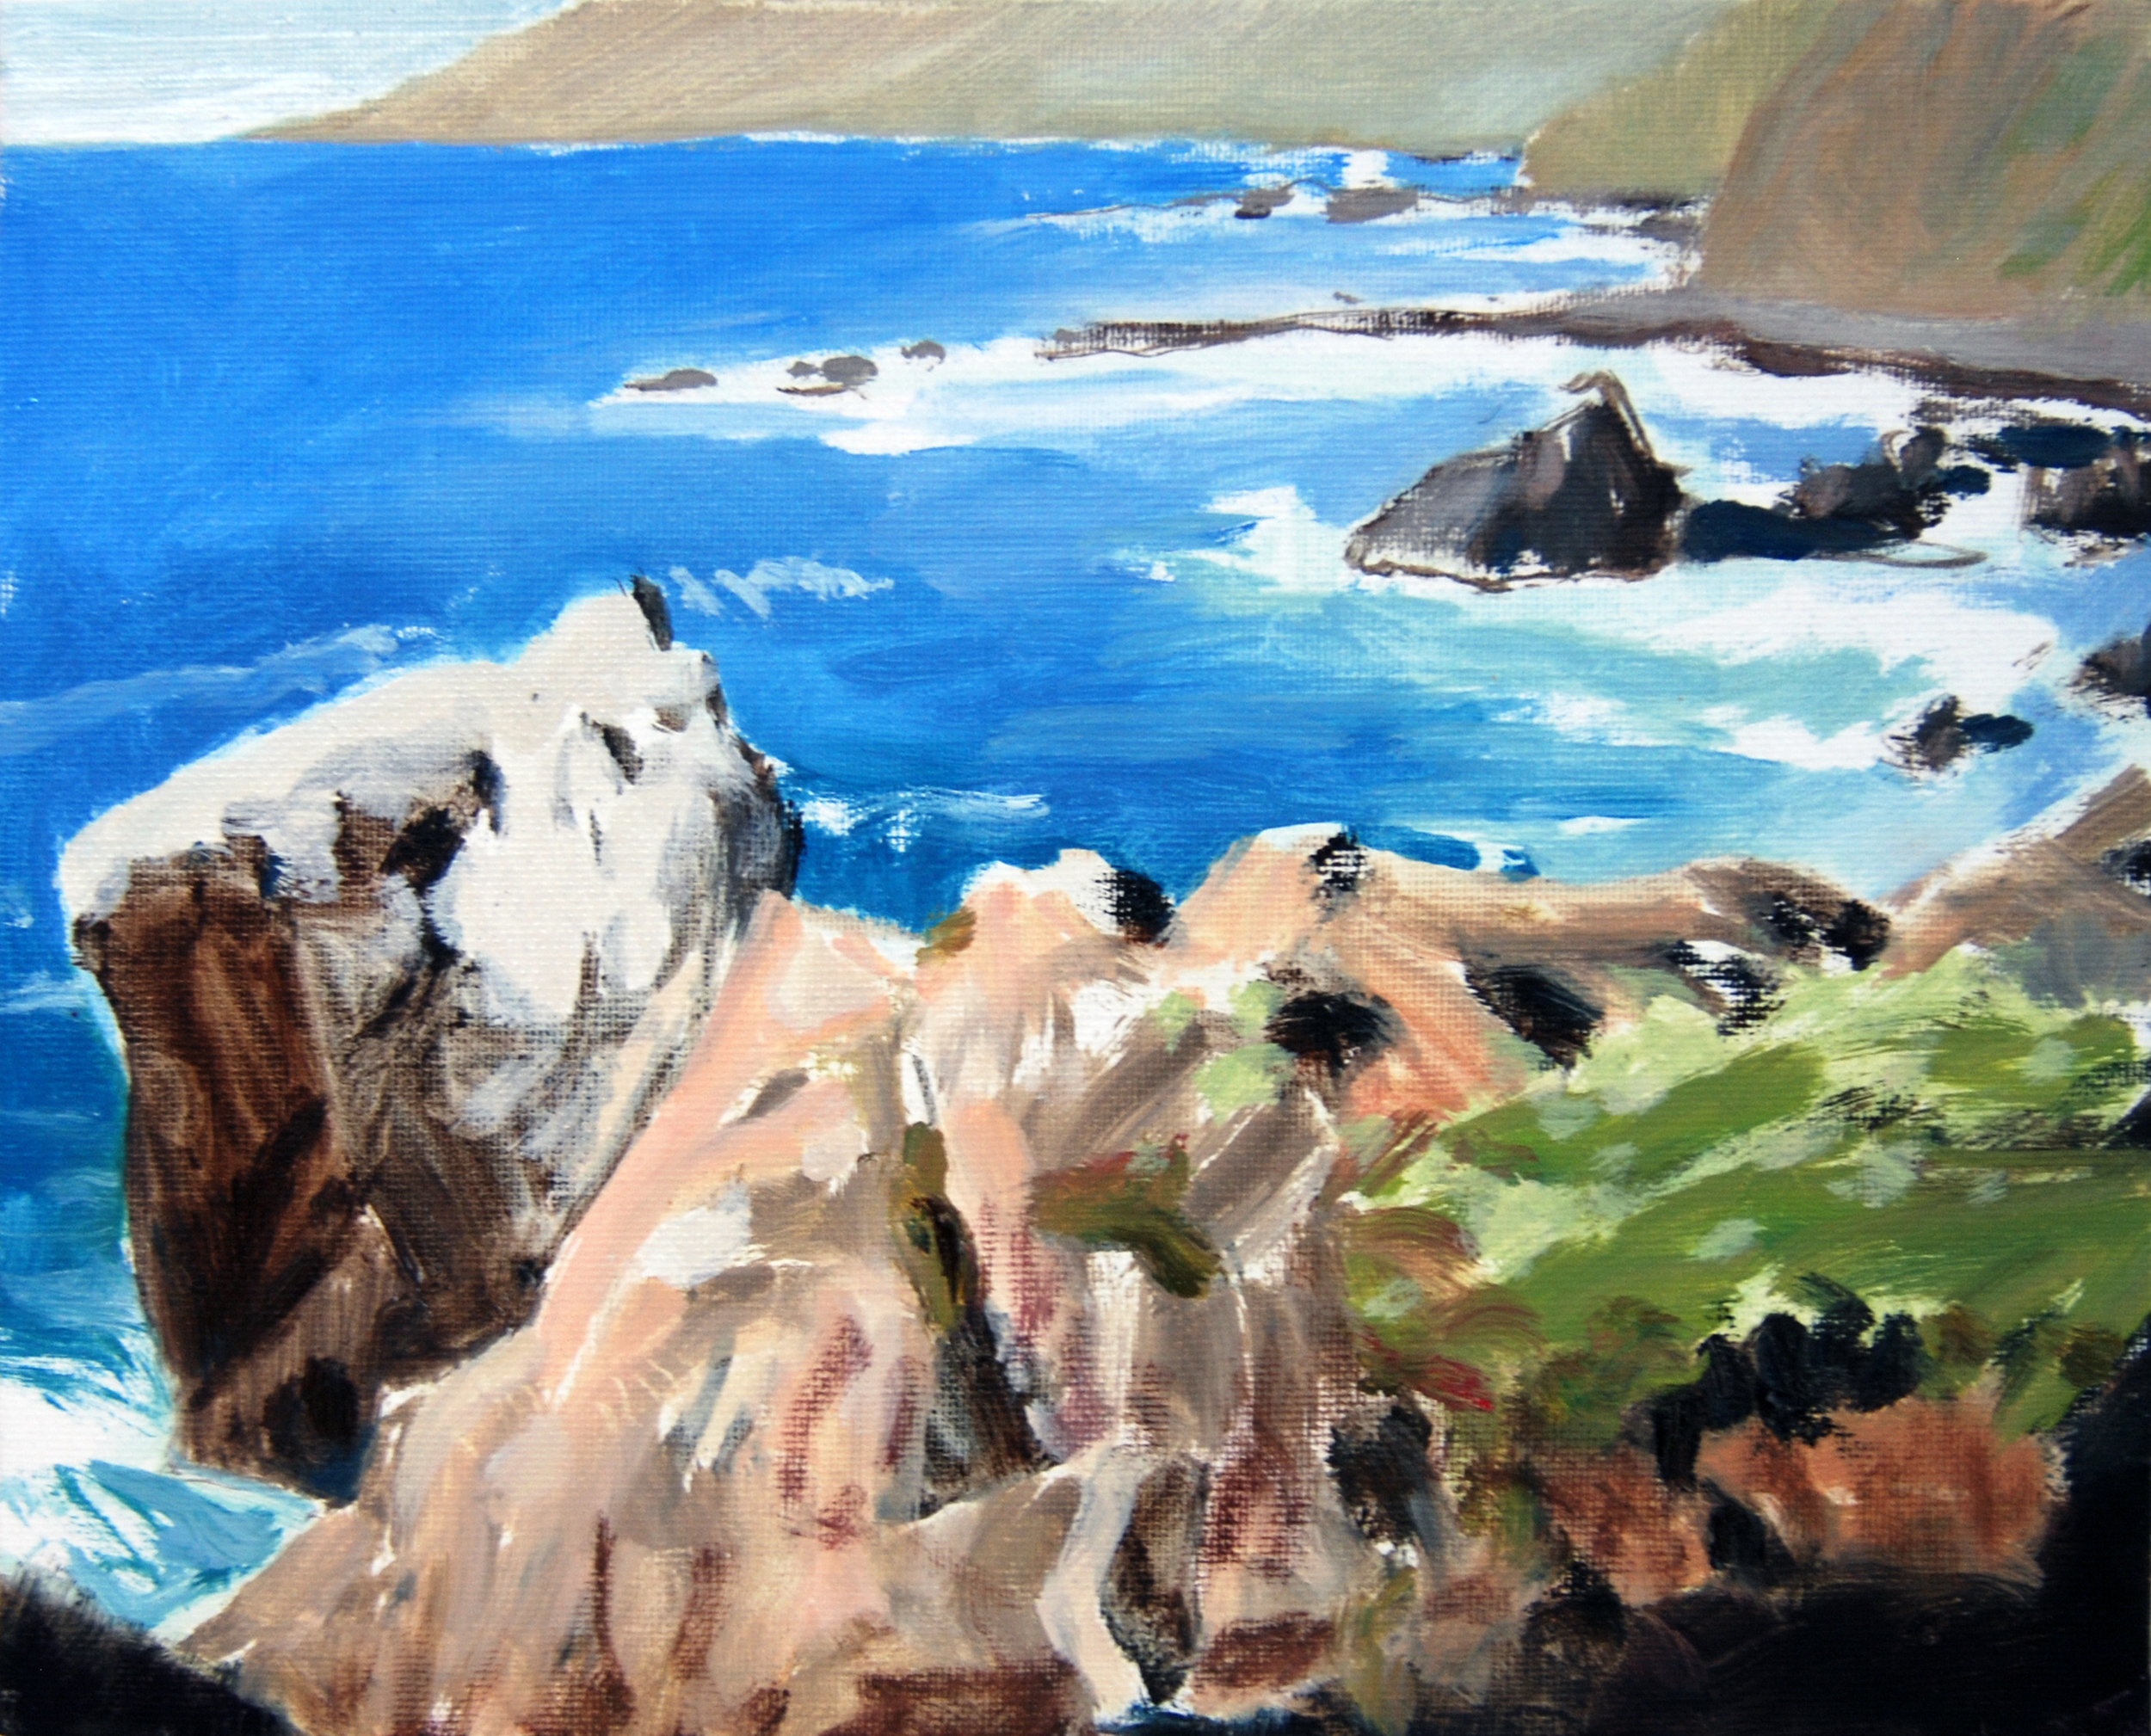   Big Sur Coast , 8 x 10 in.  Oil on canvas. Available for purchase. (2016) 